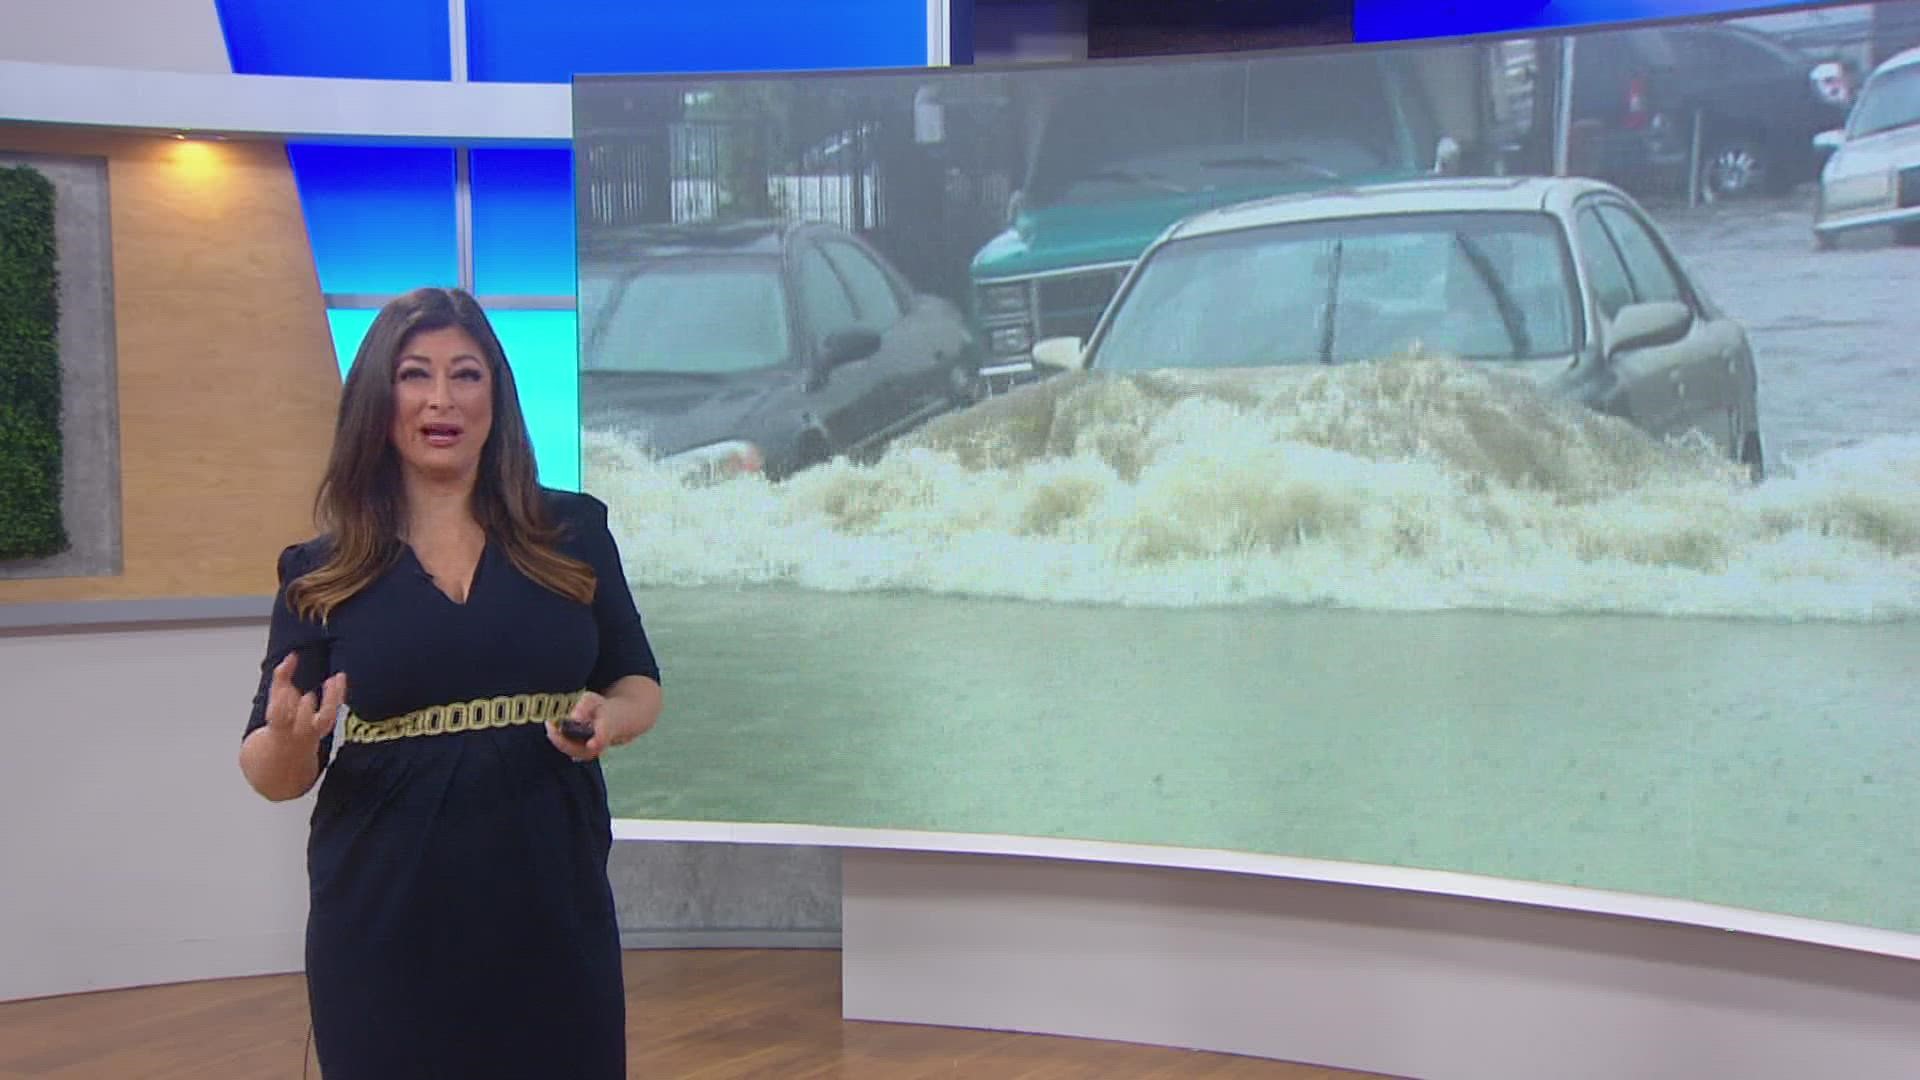 Neda is hoping to inspire you to start collecting some of the rainwater that is falling all across San Diego. She gives tips on how you can capitalize on the rain.